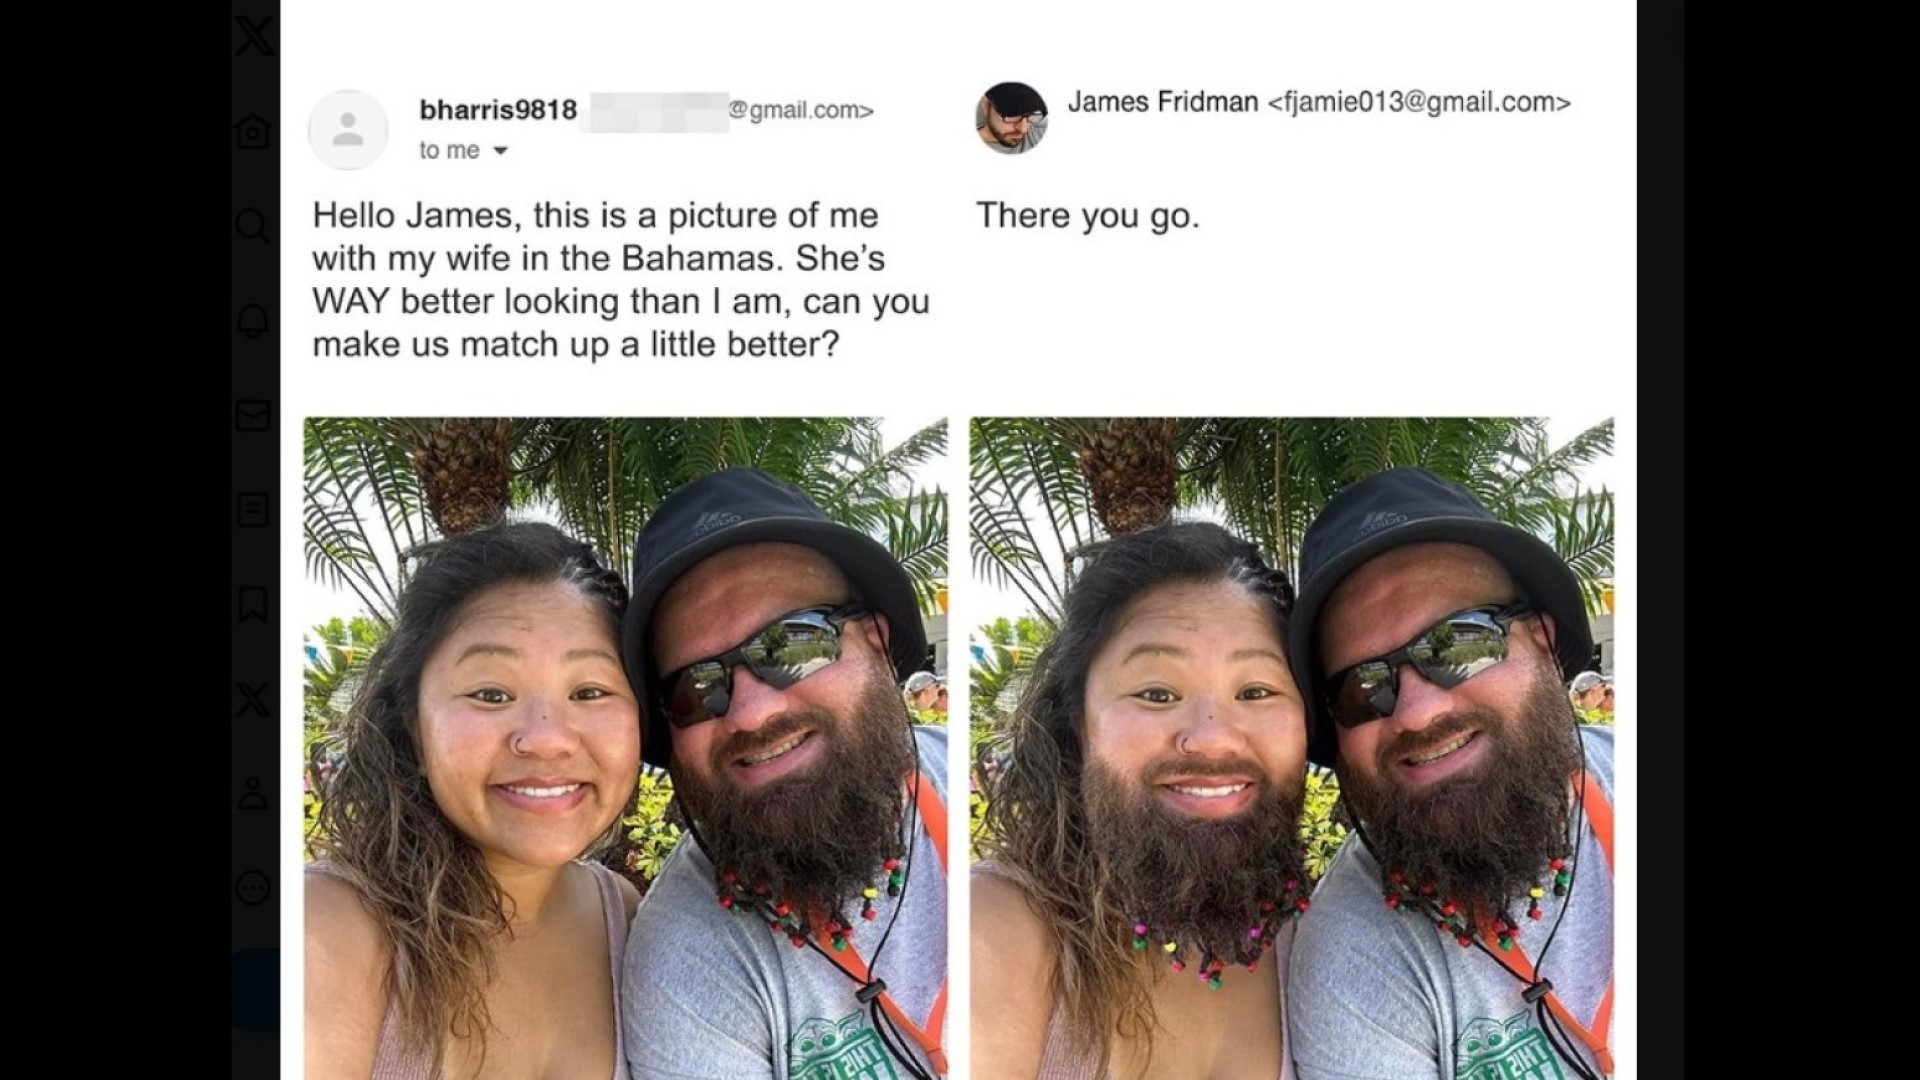 This is James Fridman, the Photoshop wizard on X